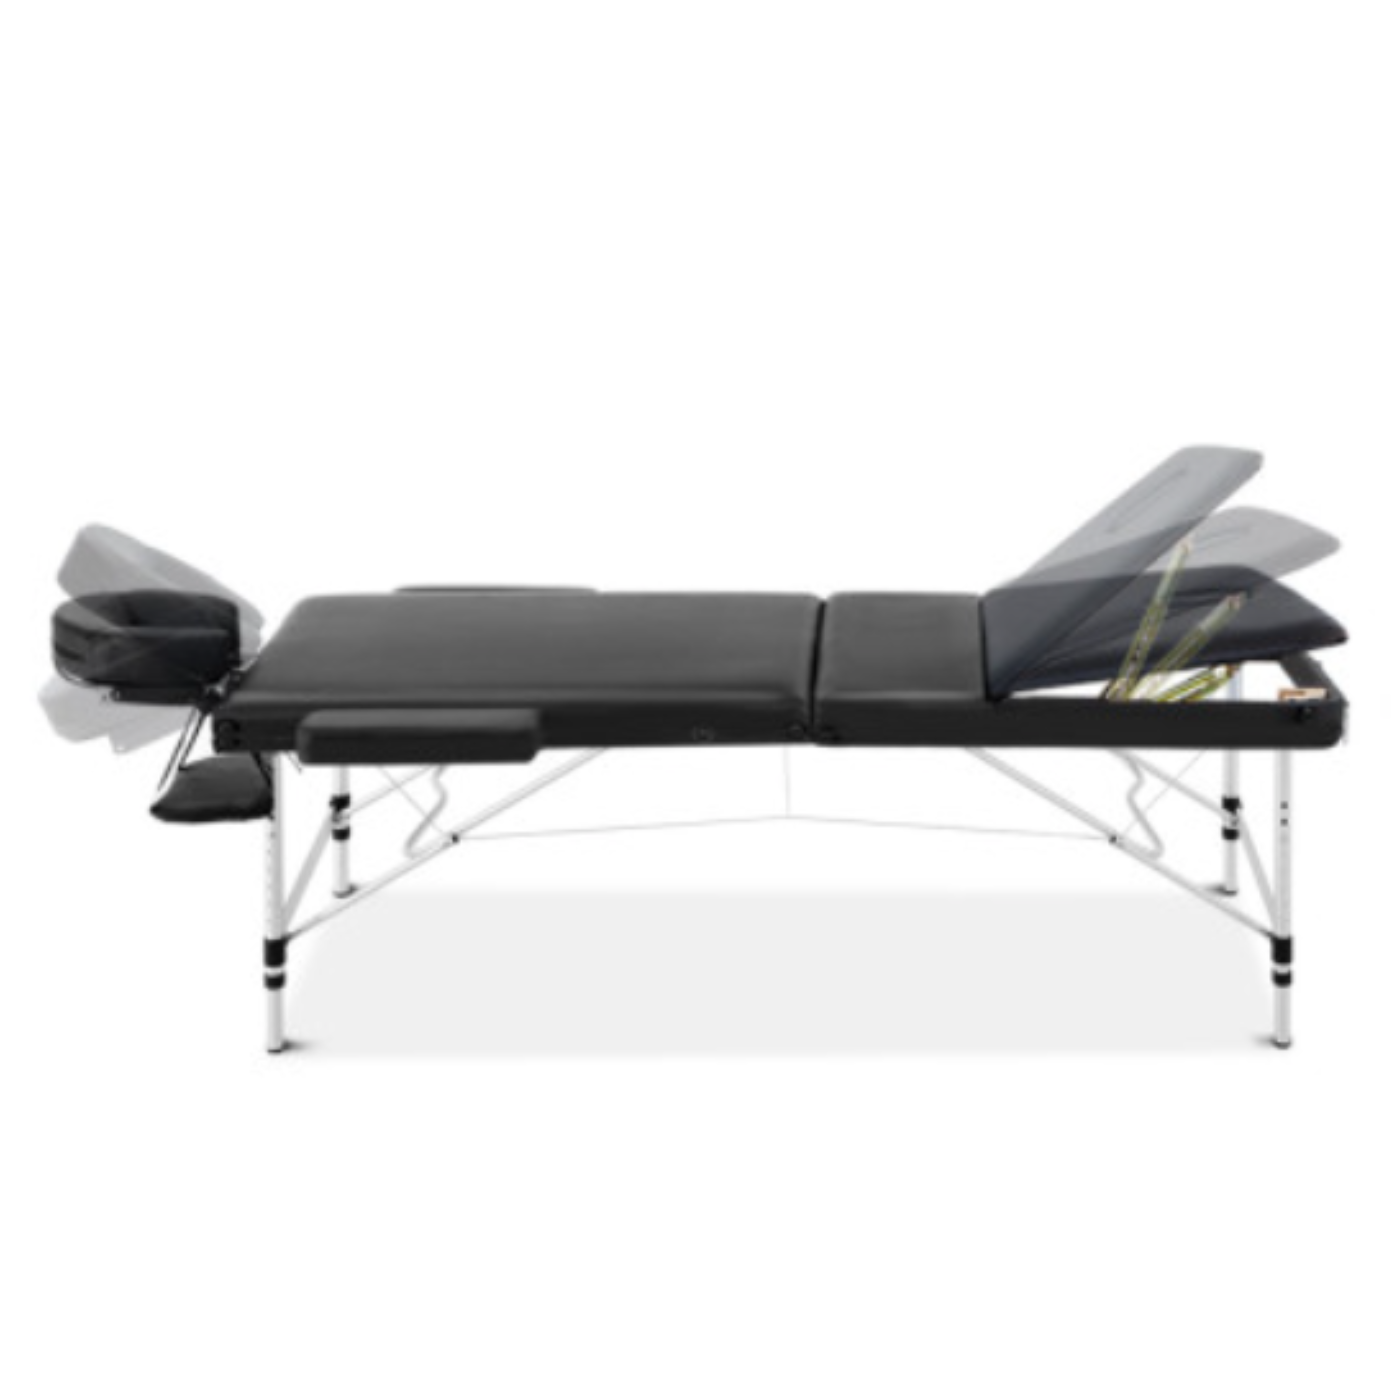 Extra Wide Portable Three Fold Massage Table - Multiple Colours